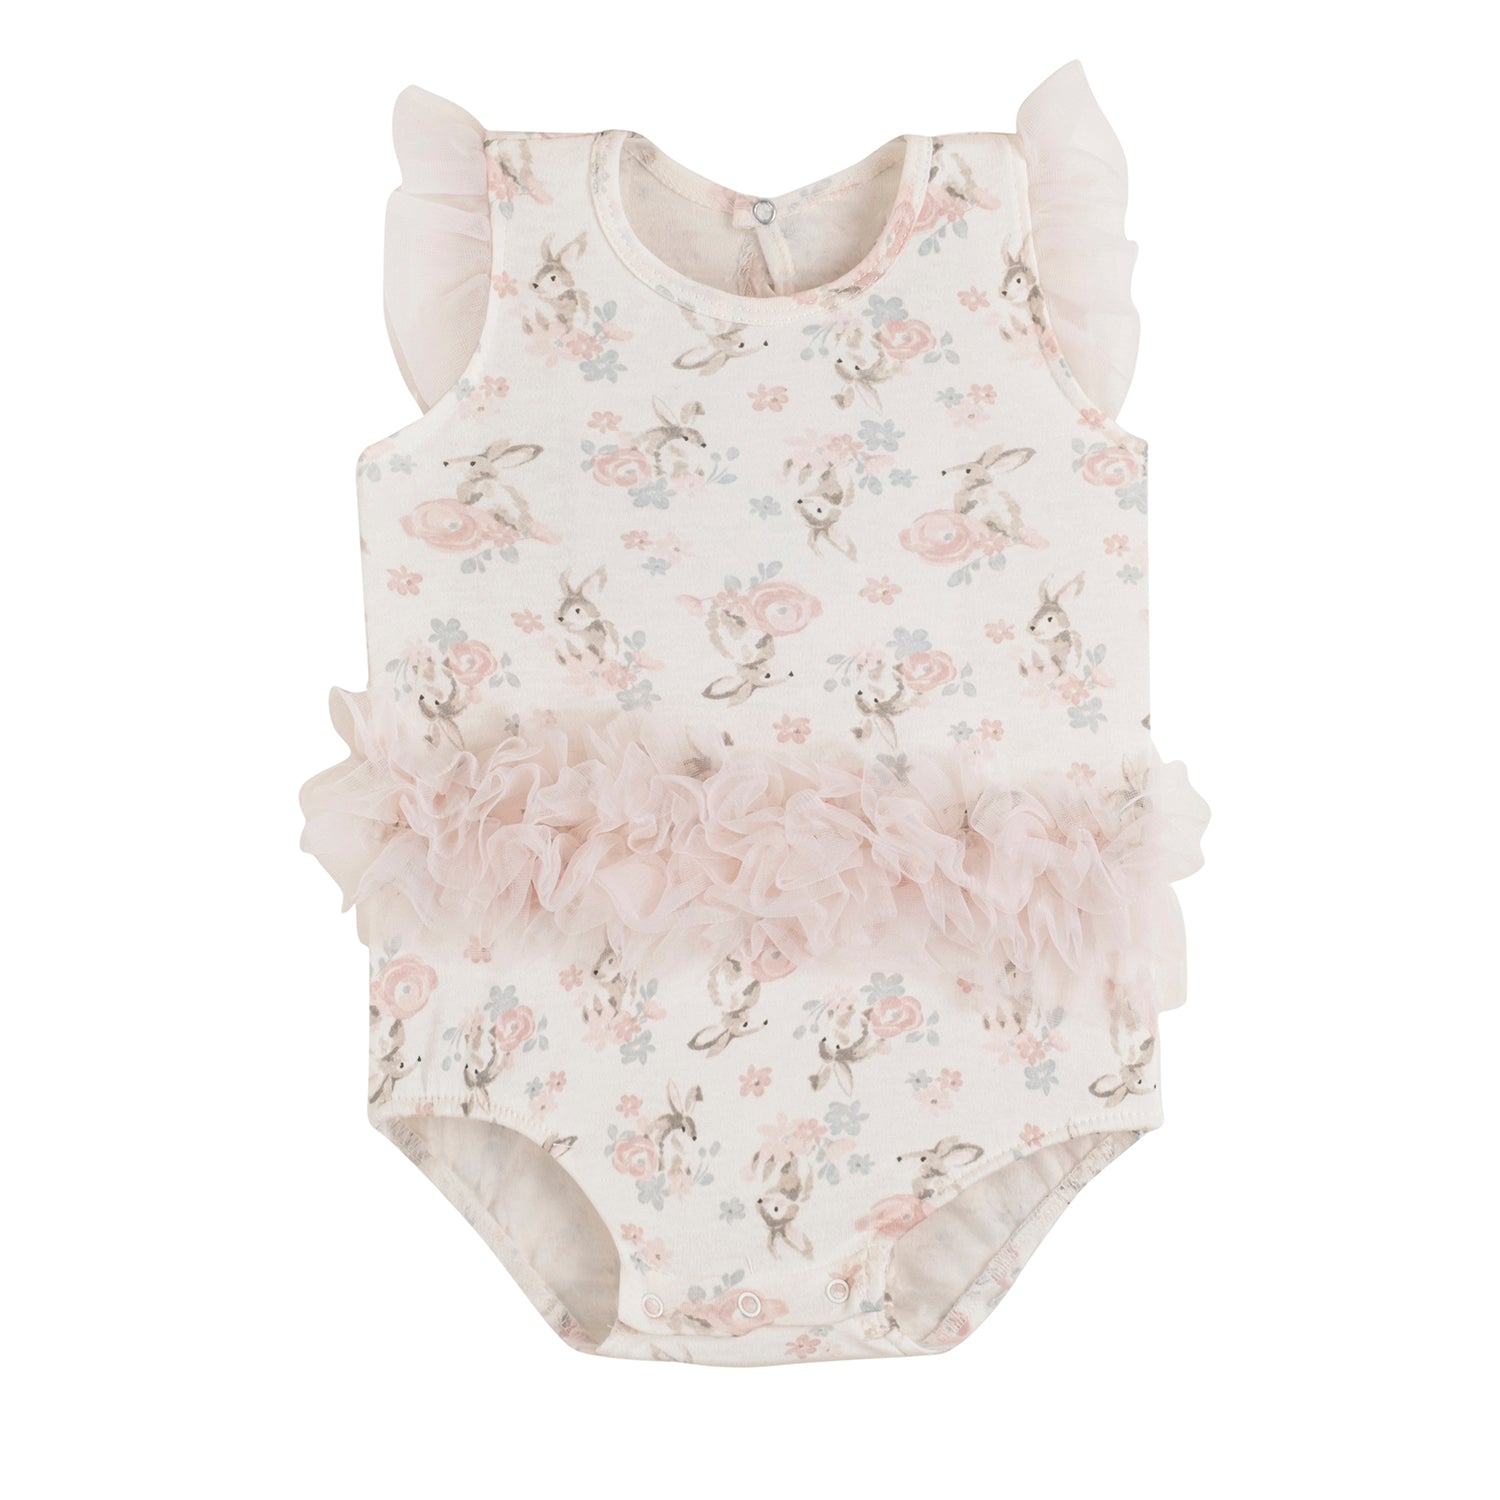 Baby Moo Floral Gift Set 3 Piece With Bodysuit, Socks And Headband - Peach